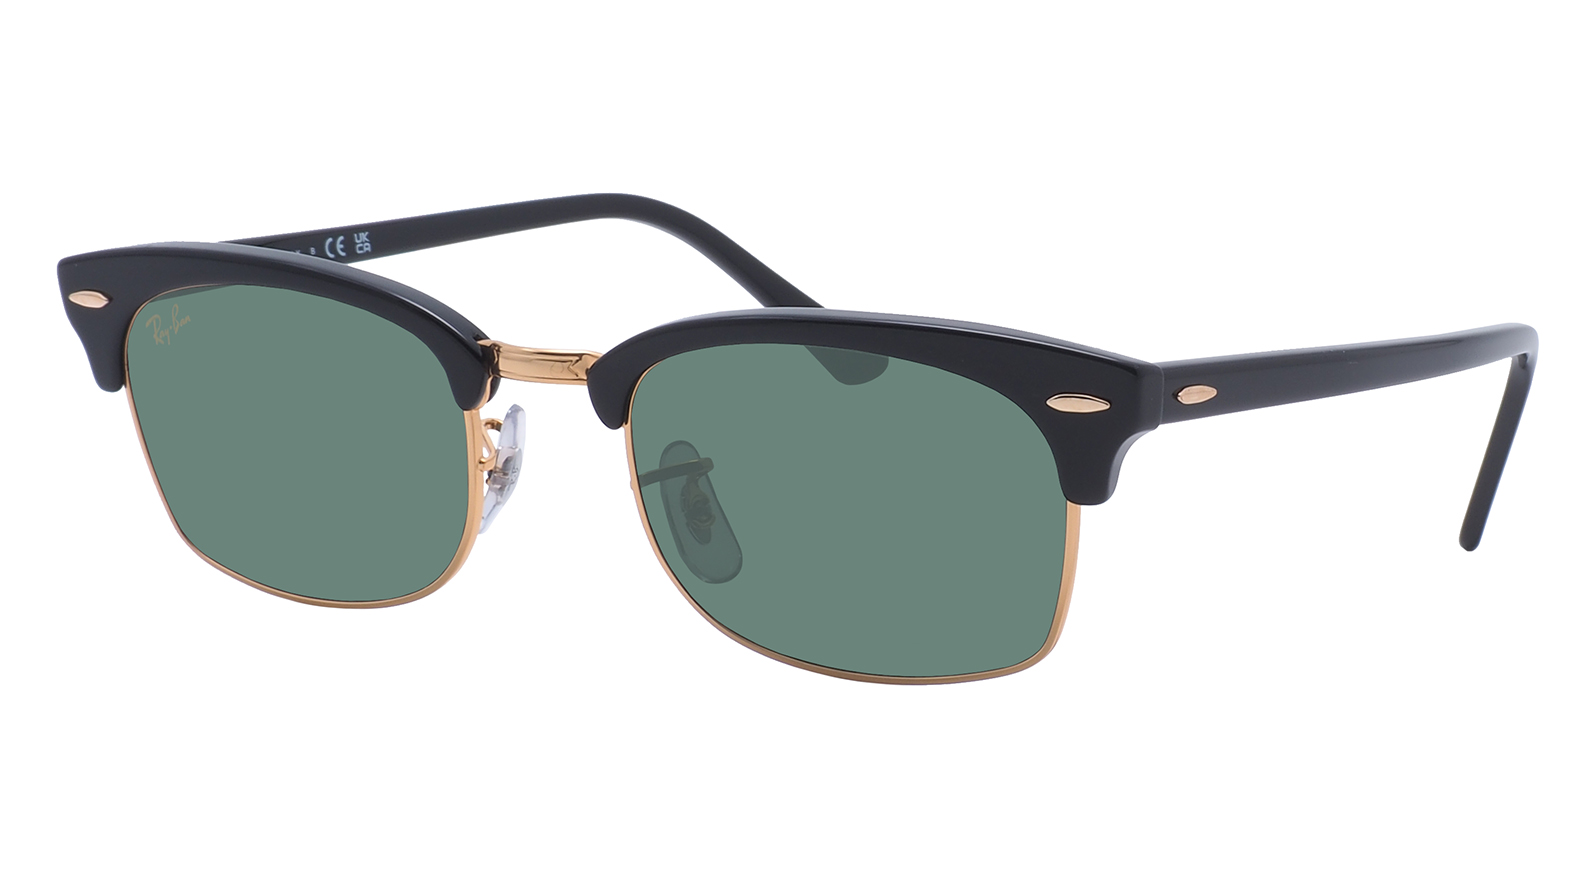 Ray-Ban Clubmaster Square RB 3916 130331 ray ban clubmaster square rb 3916 130331